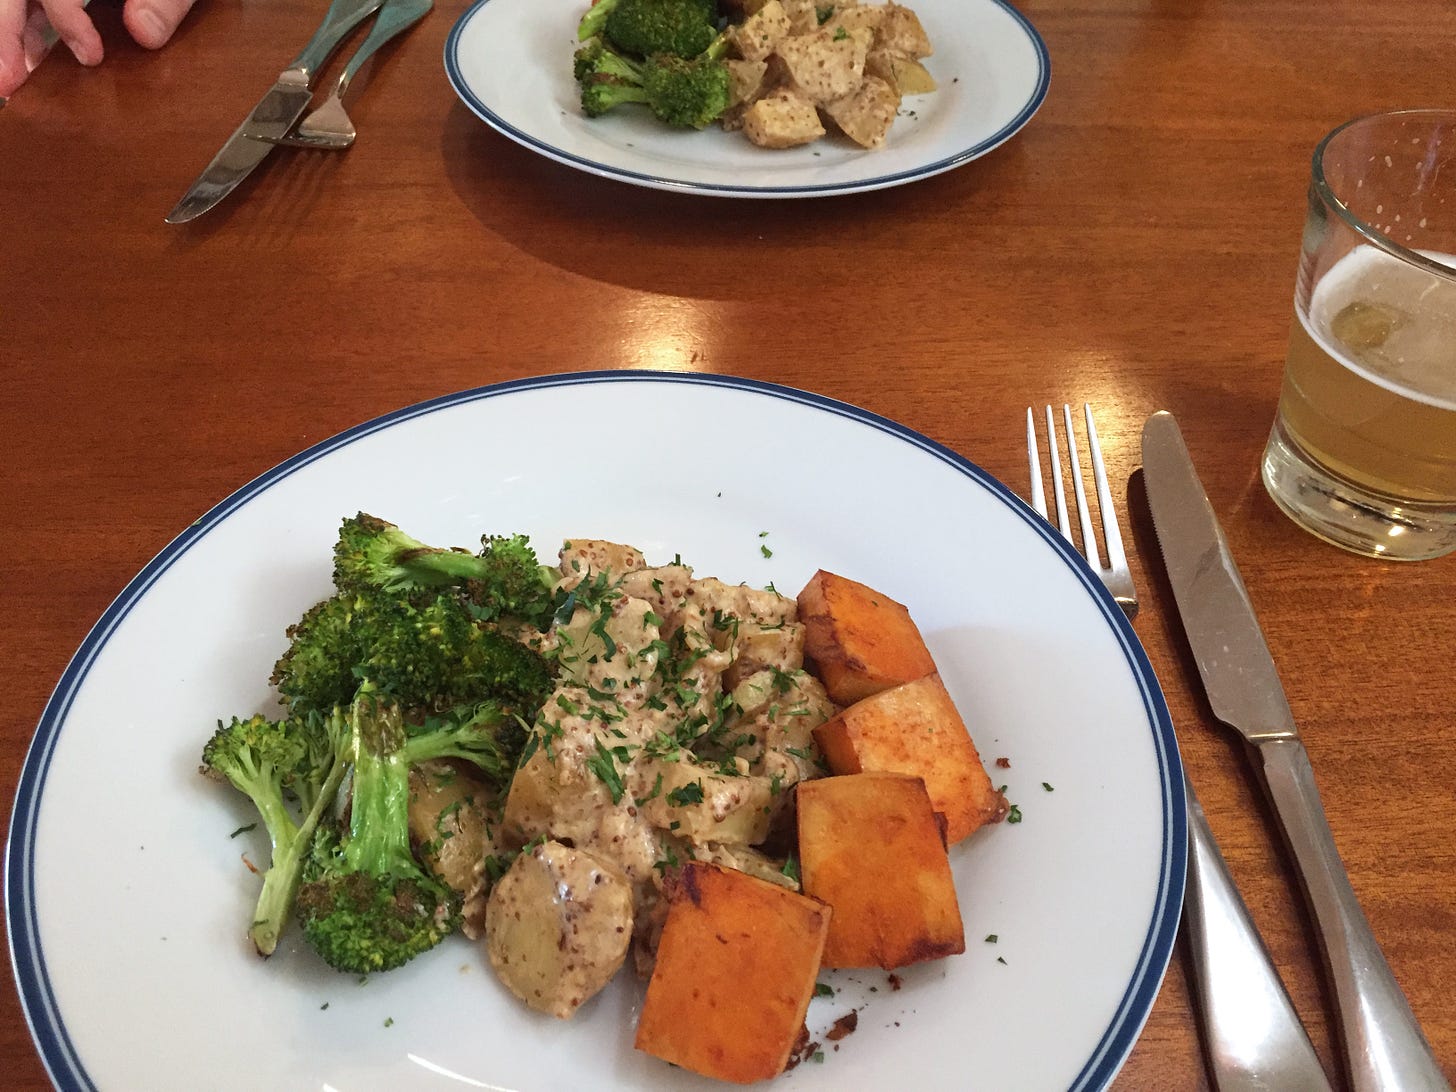 A plate of potato salad in grainy mustard dressing, with bright orange squares of roasted tofu on one side, and roasted broccoli on the other. A sprinkle of parsley sits on top.